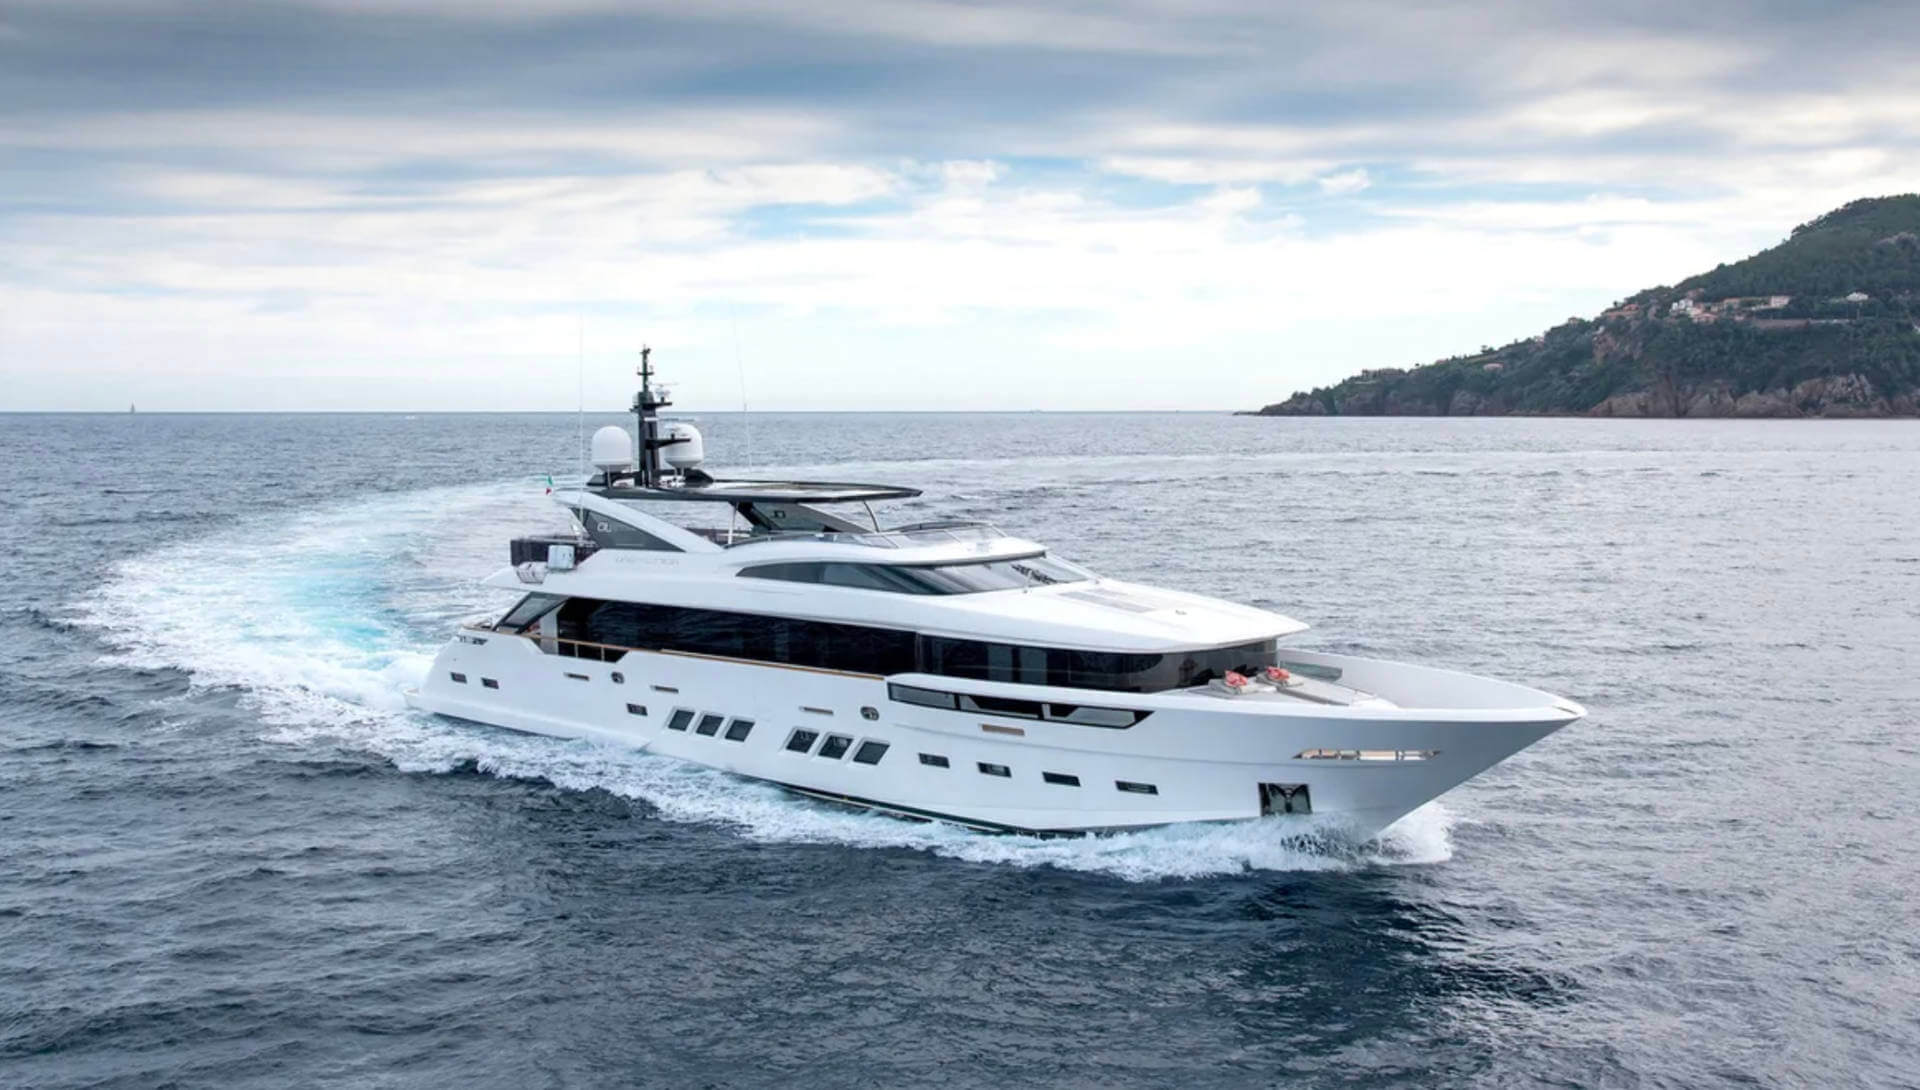 Ocean Independence introduces the Largest Baglietto ever built - perfect for event charters